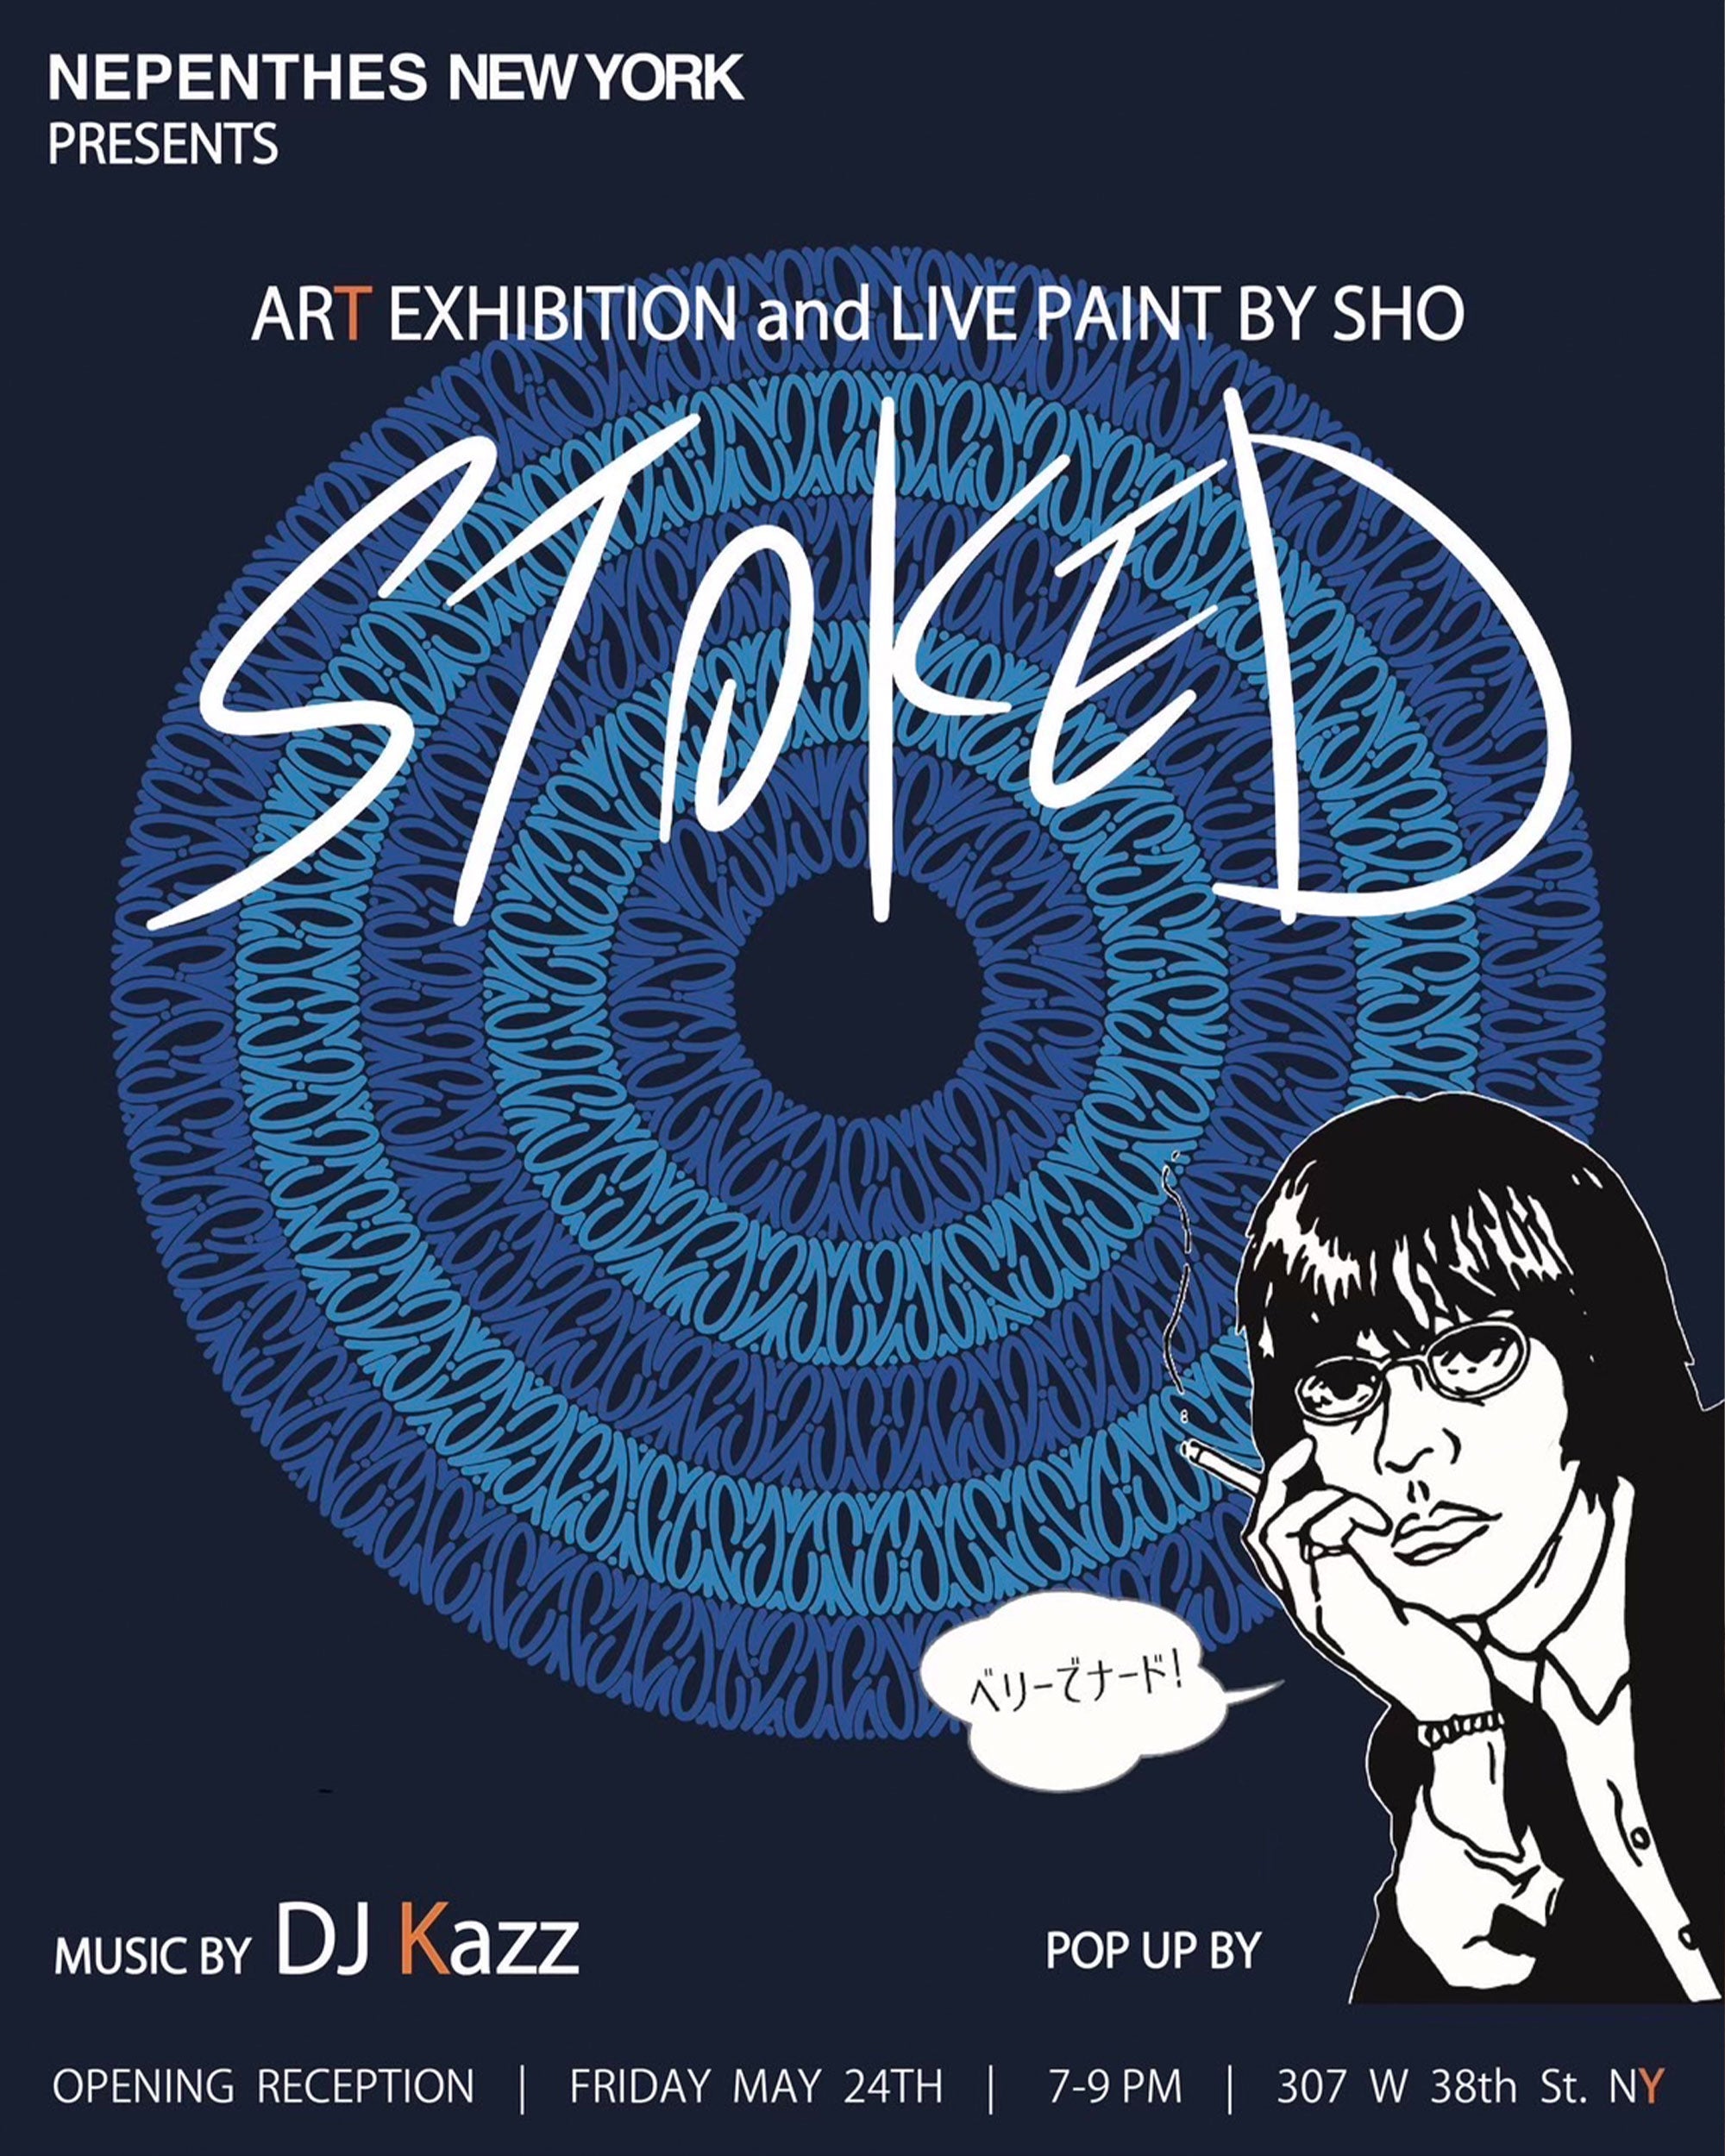 Opening Reception: STOKED - Friday, May 24th, 7PM - 9PM